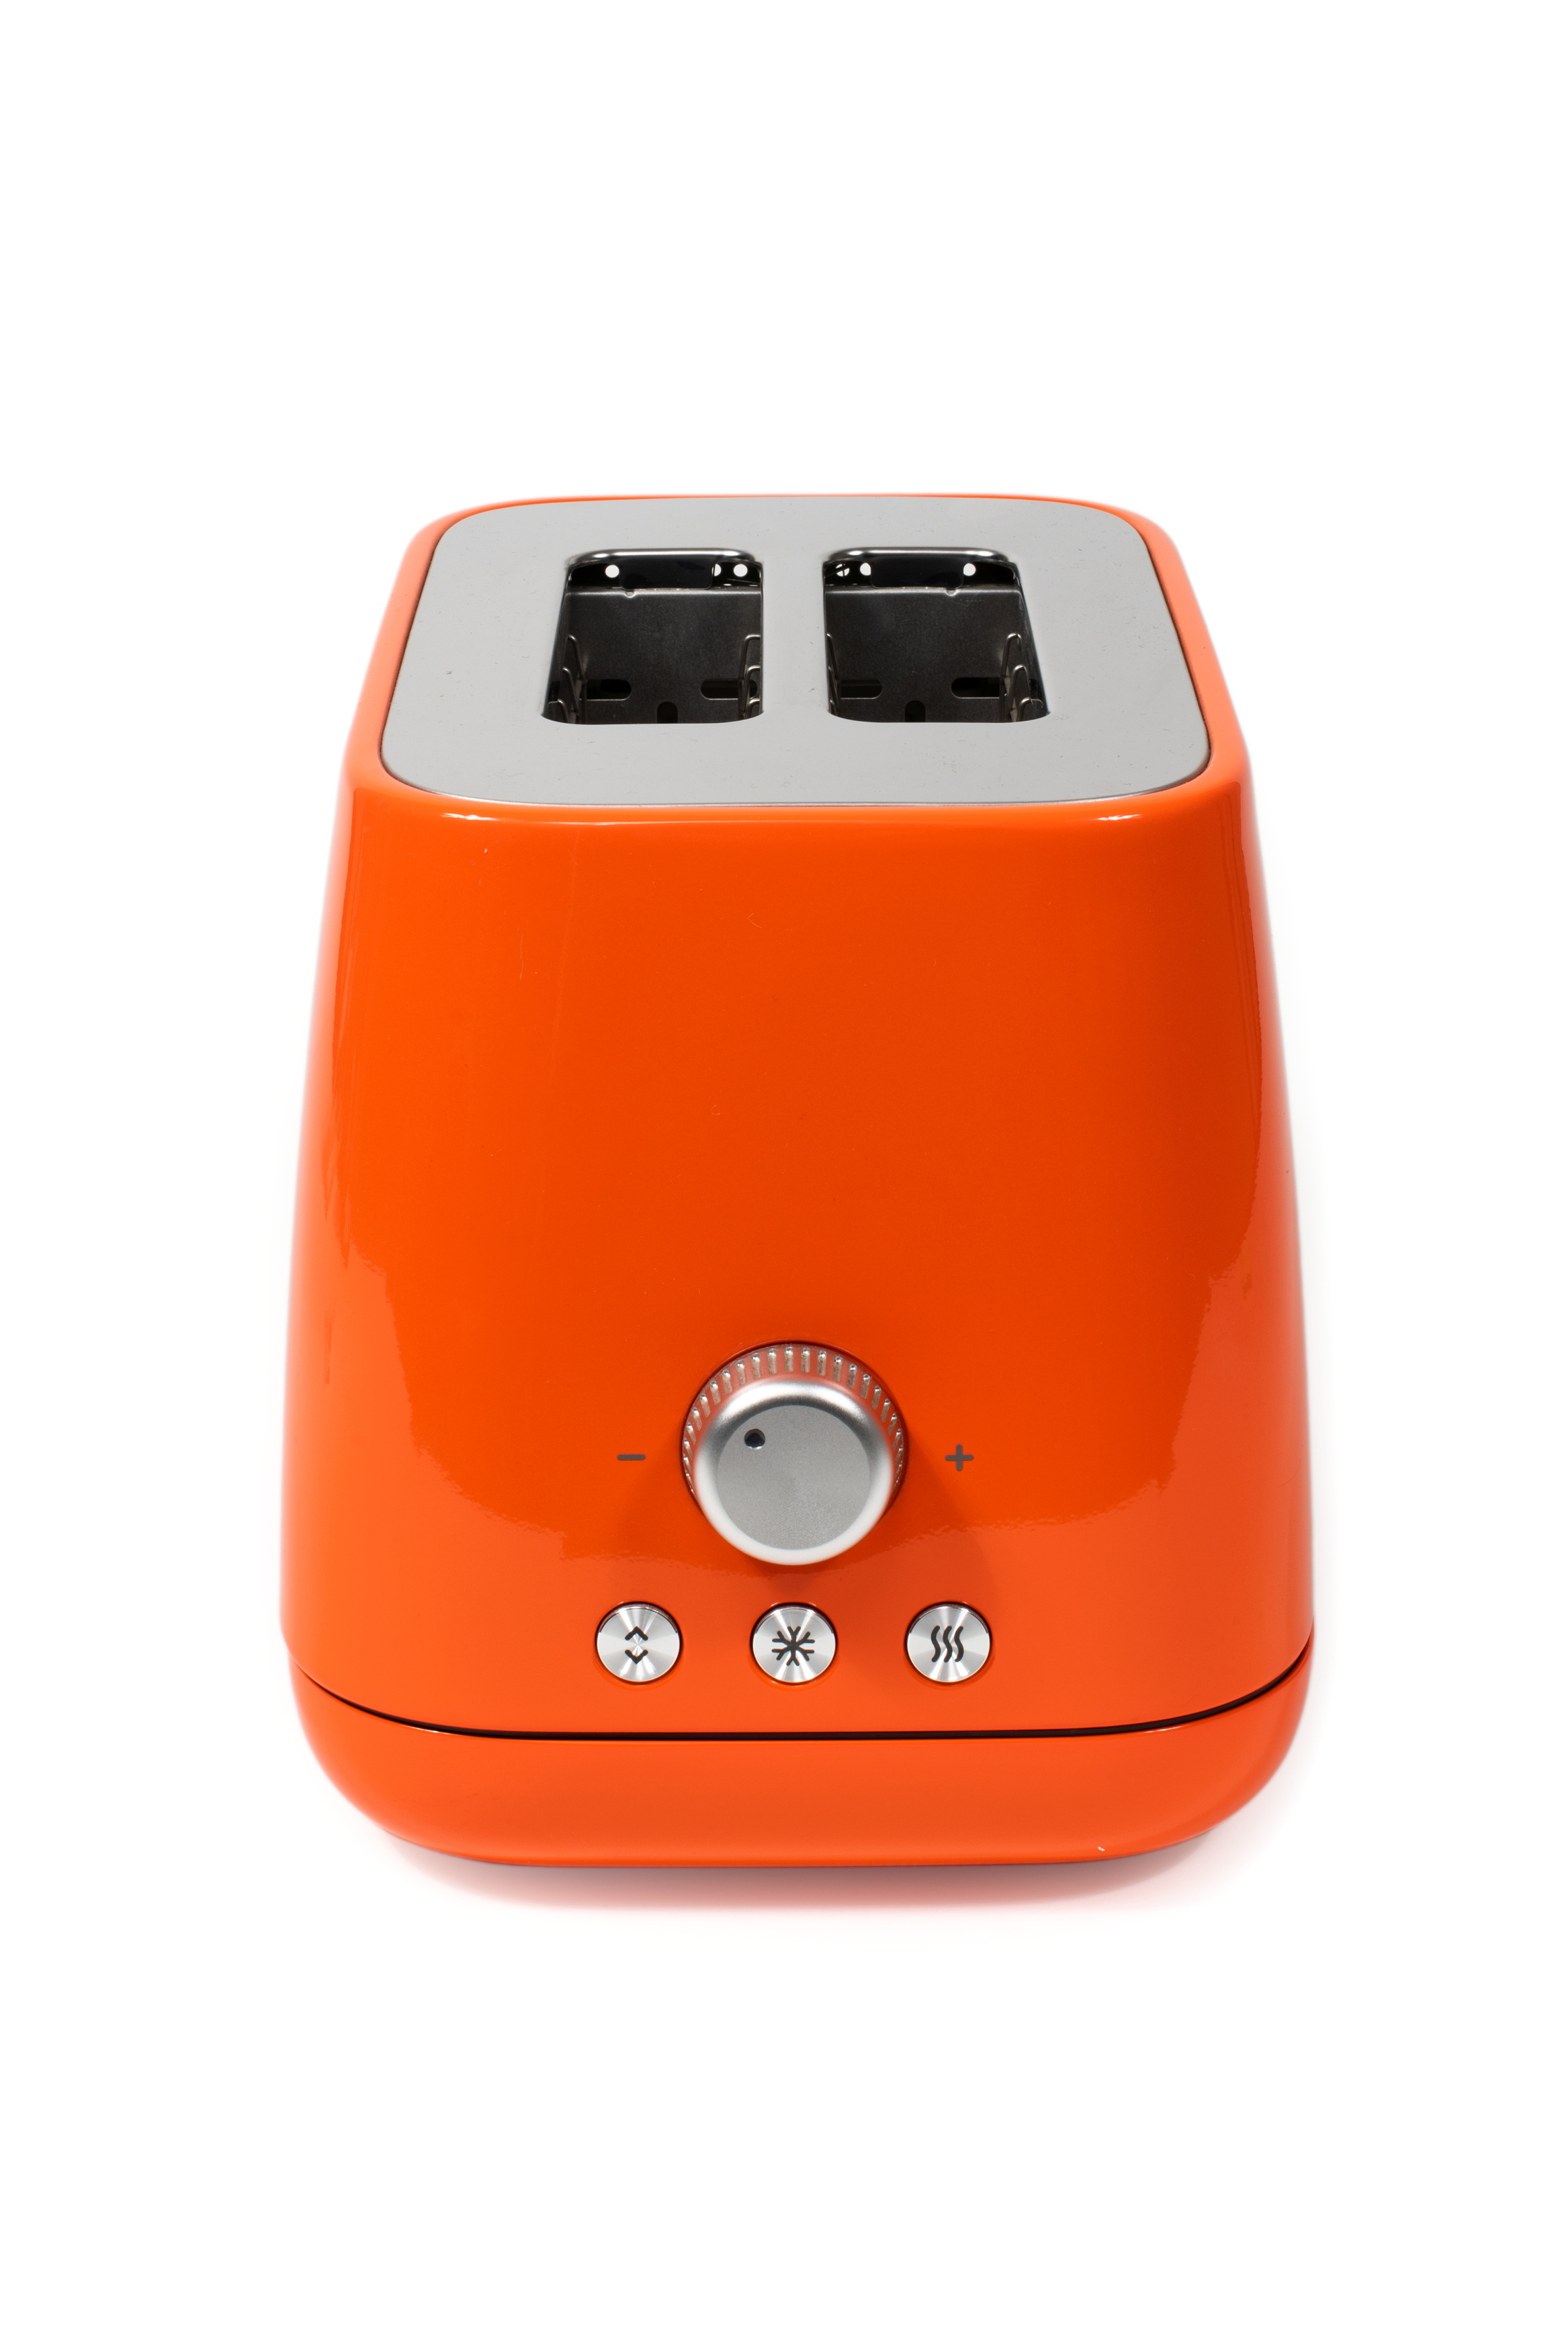 Toaster designed by Marc Newson for Sunbeam